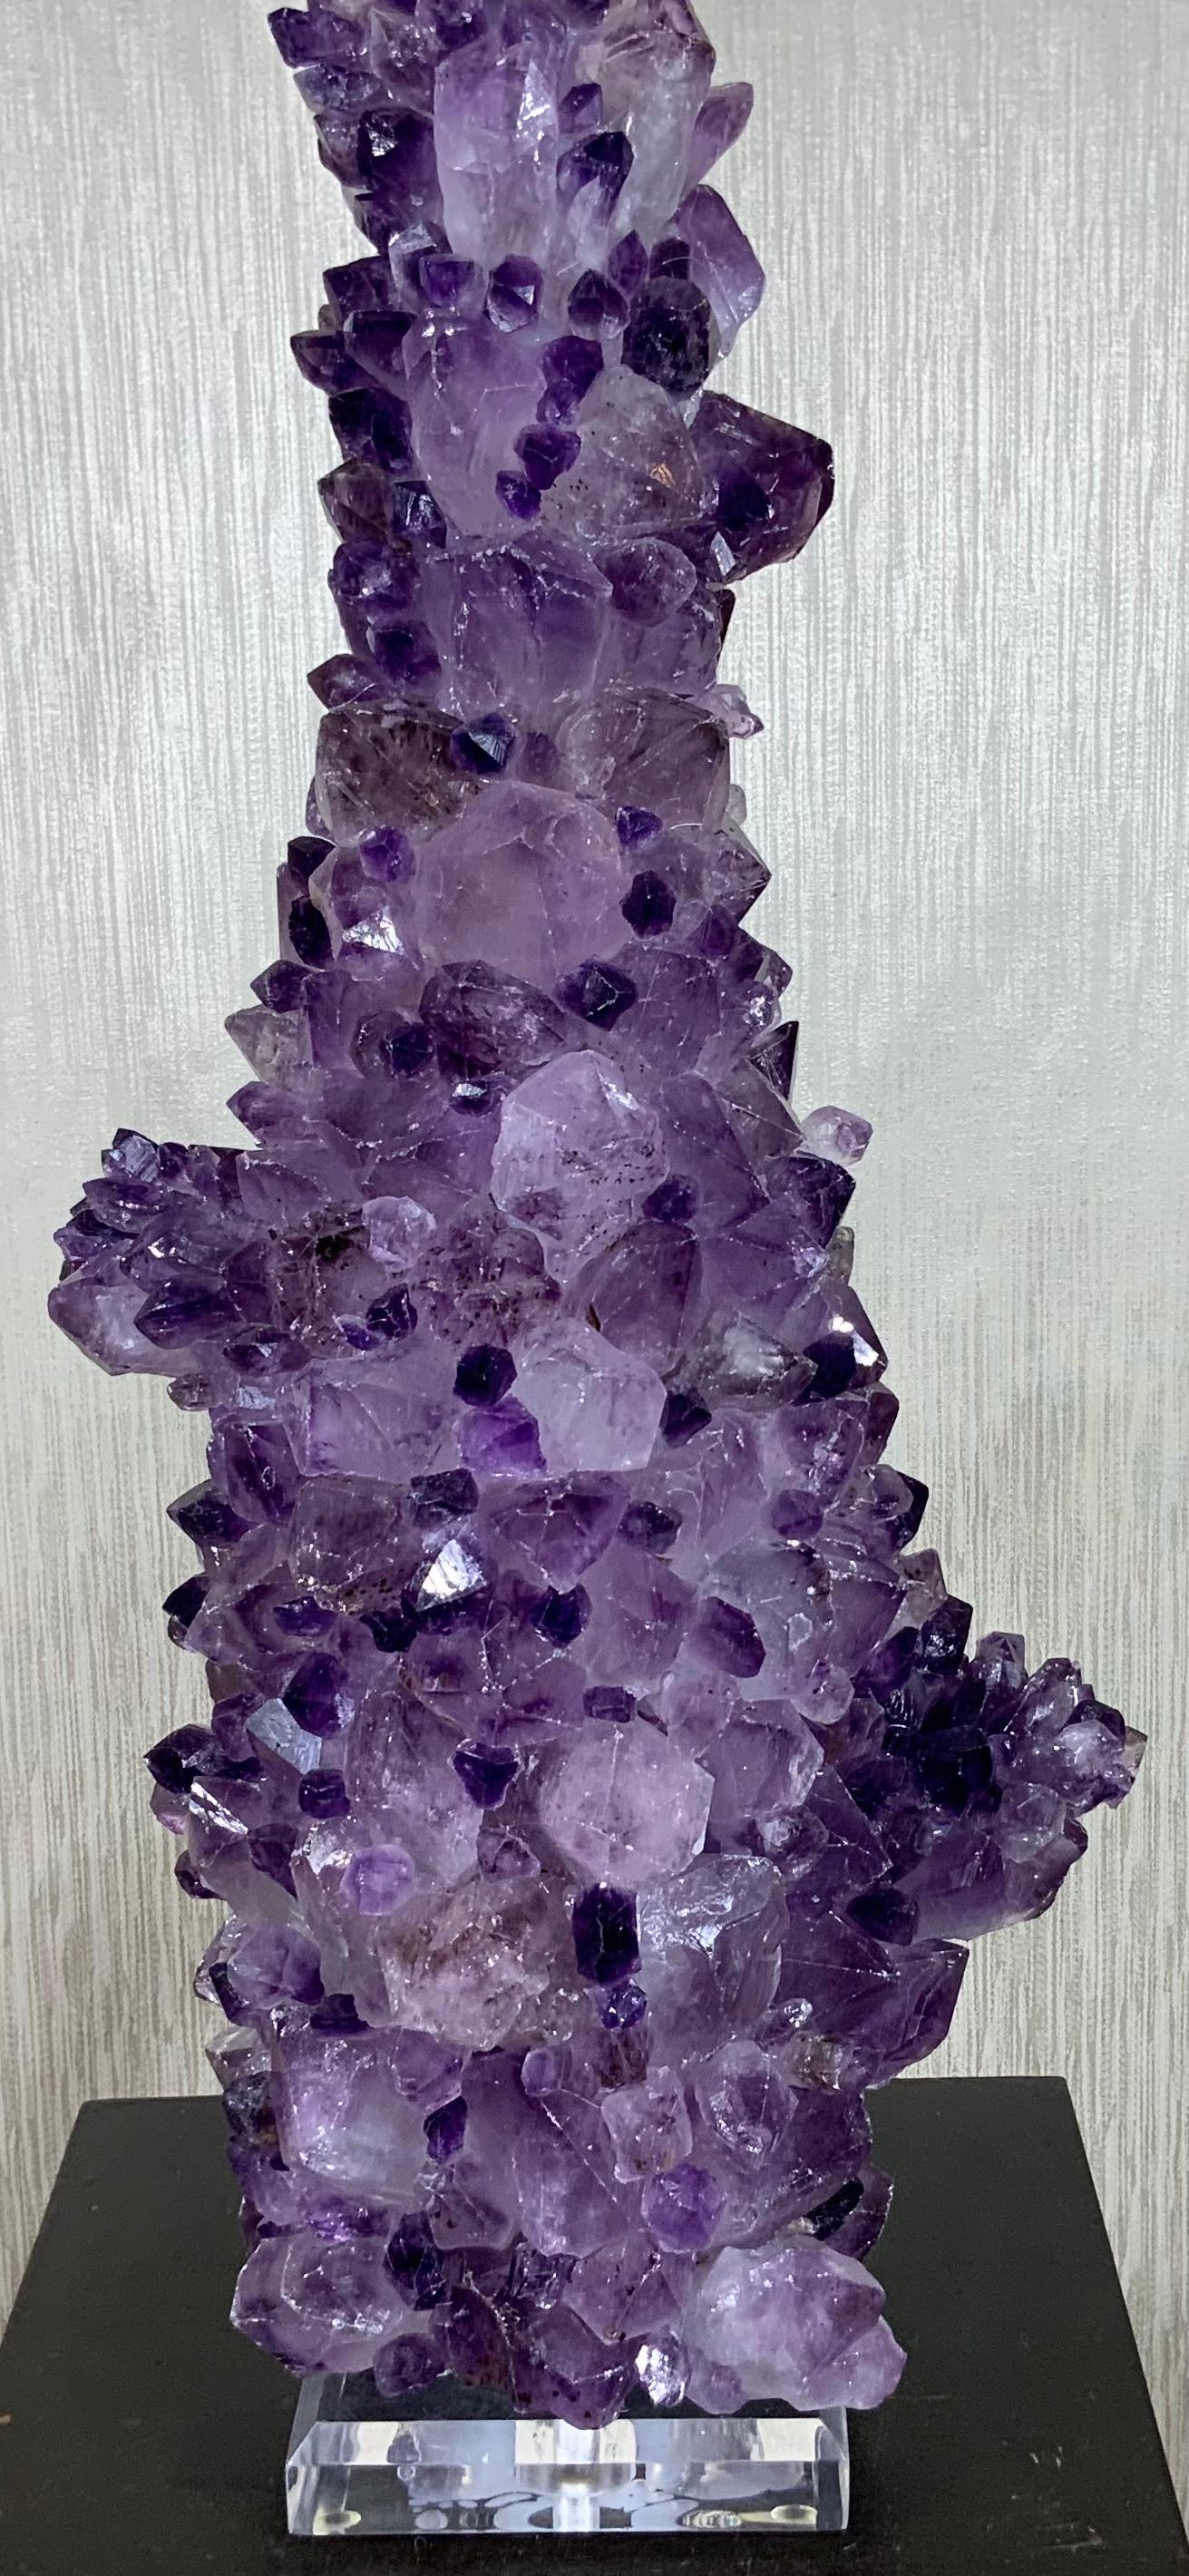 Stunning crystal table lamps, made from Genuine amethyst rock crystal in the, professionally mounted by the artist on beveled Lucite base. Crome hardware with 3 way light socket. Amethyst top lamp finial
Included. Shade is not included.
One of a